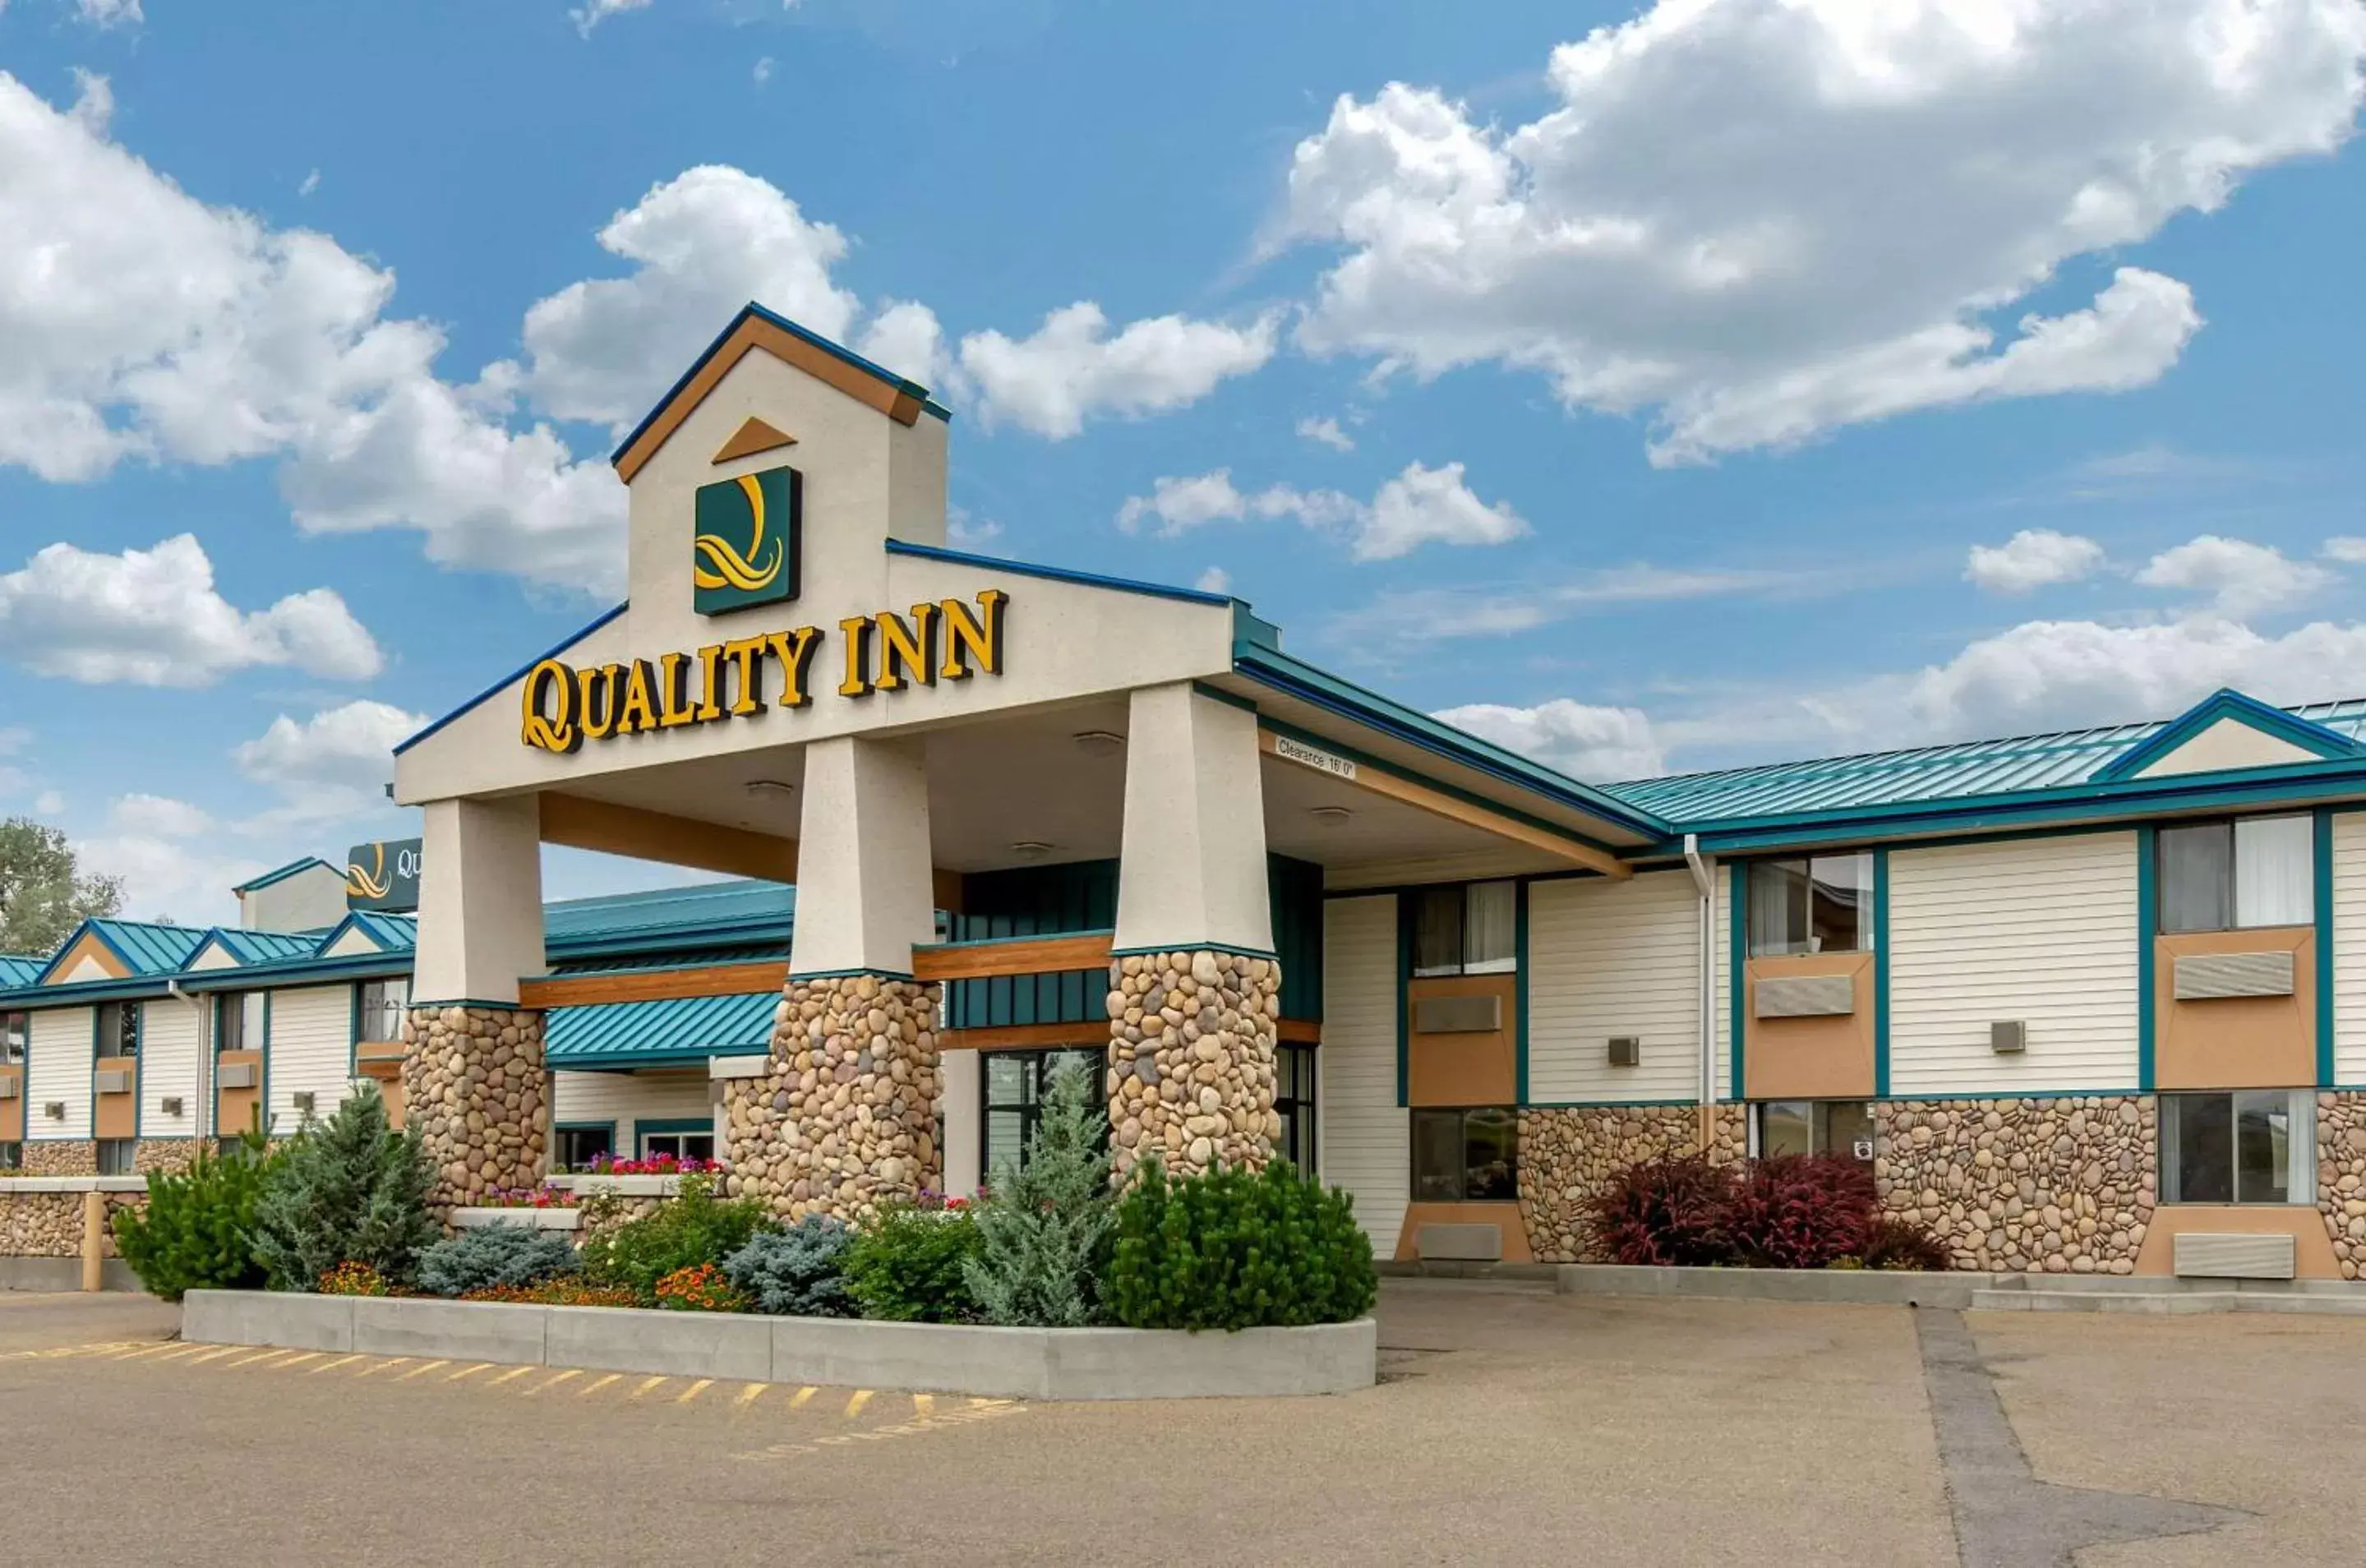 Property Building in Quality Inn Dillon I-15